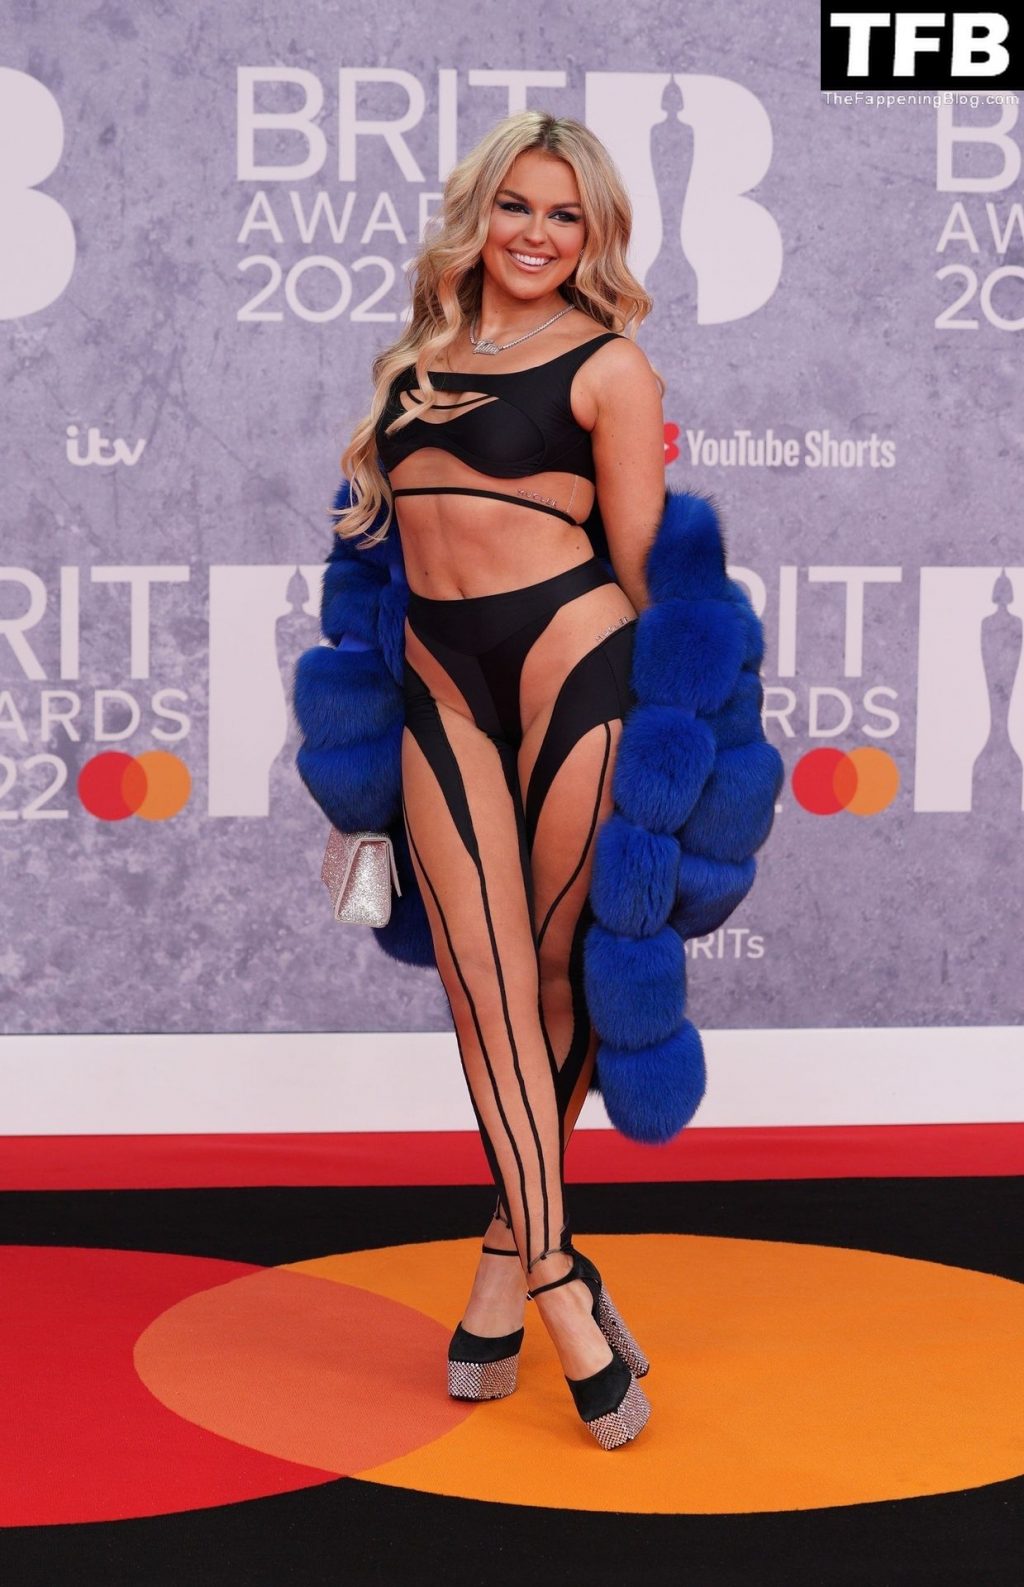 Tallia Storm Flaunts Her Sexy Figure in a Risqué Black Top and Cutout Trousers at The BRIT Awards (18 Photos)